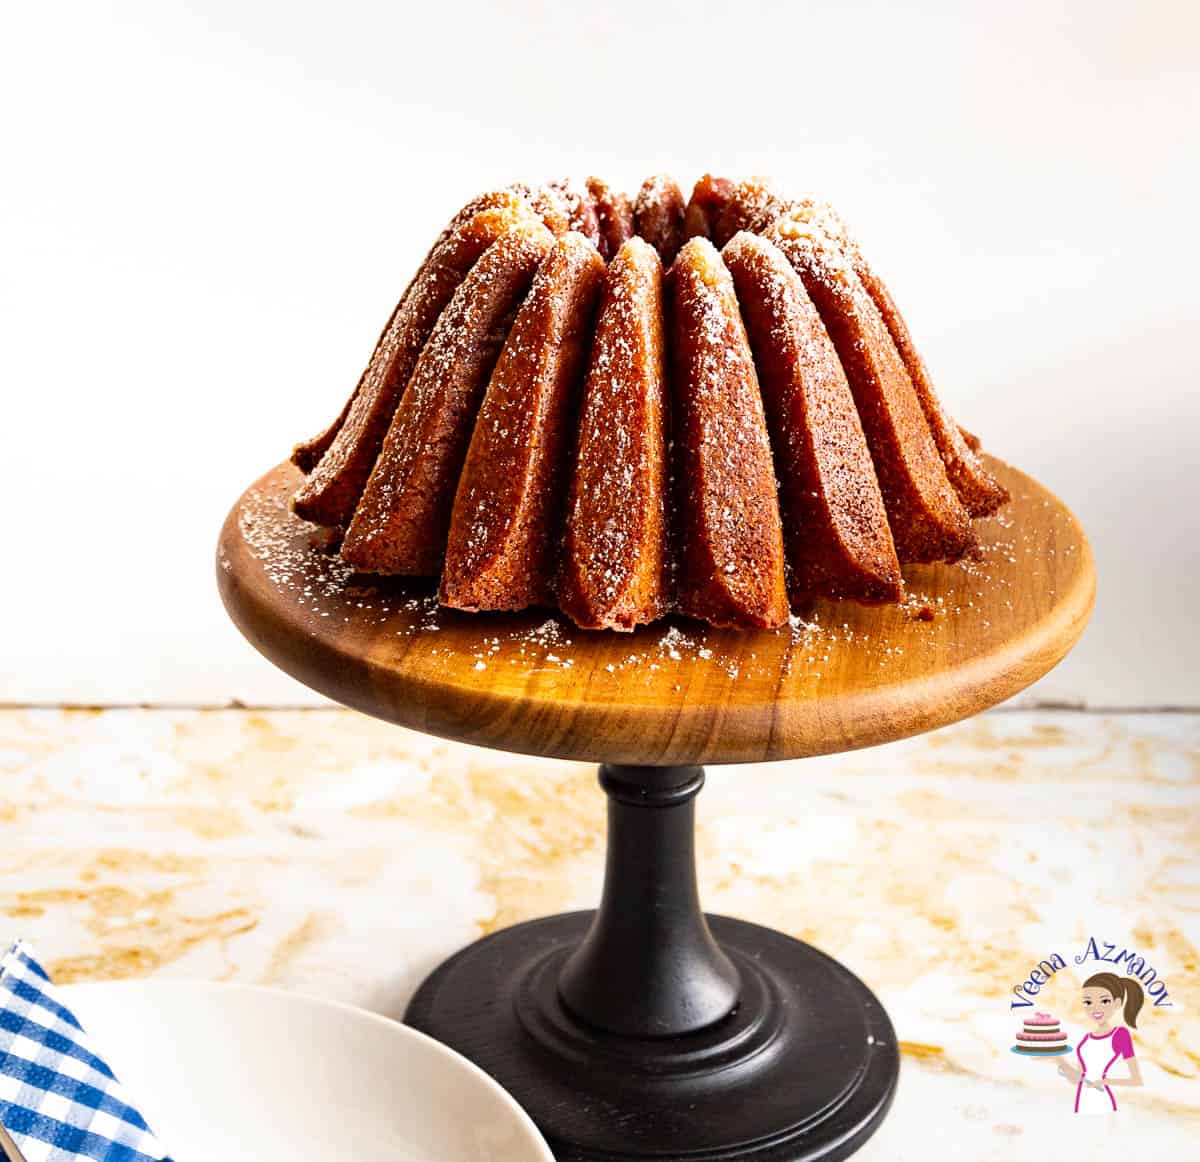 A strawberry bundt cake on a wooden cake stand